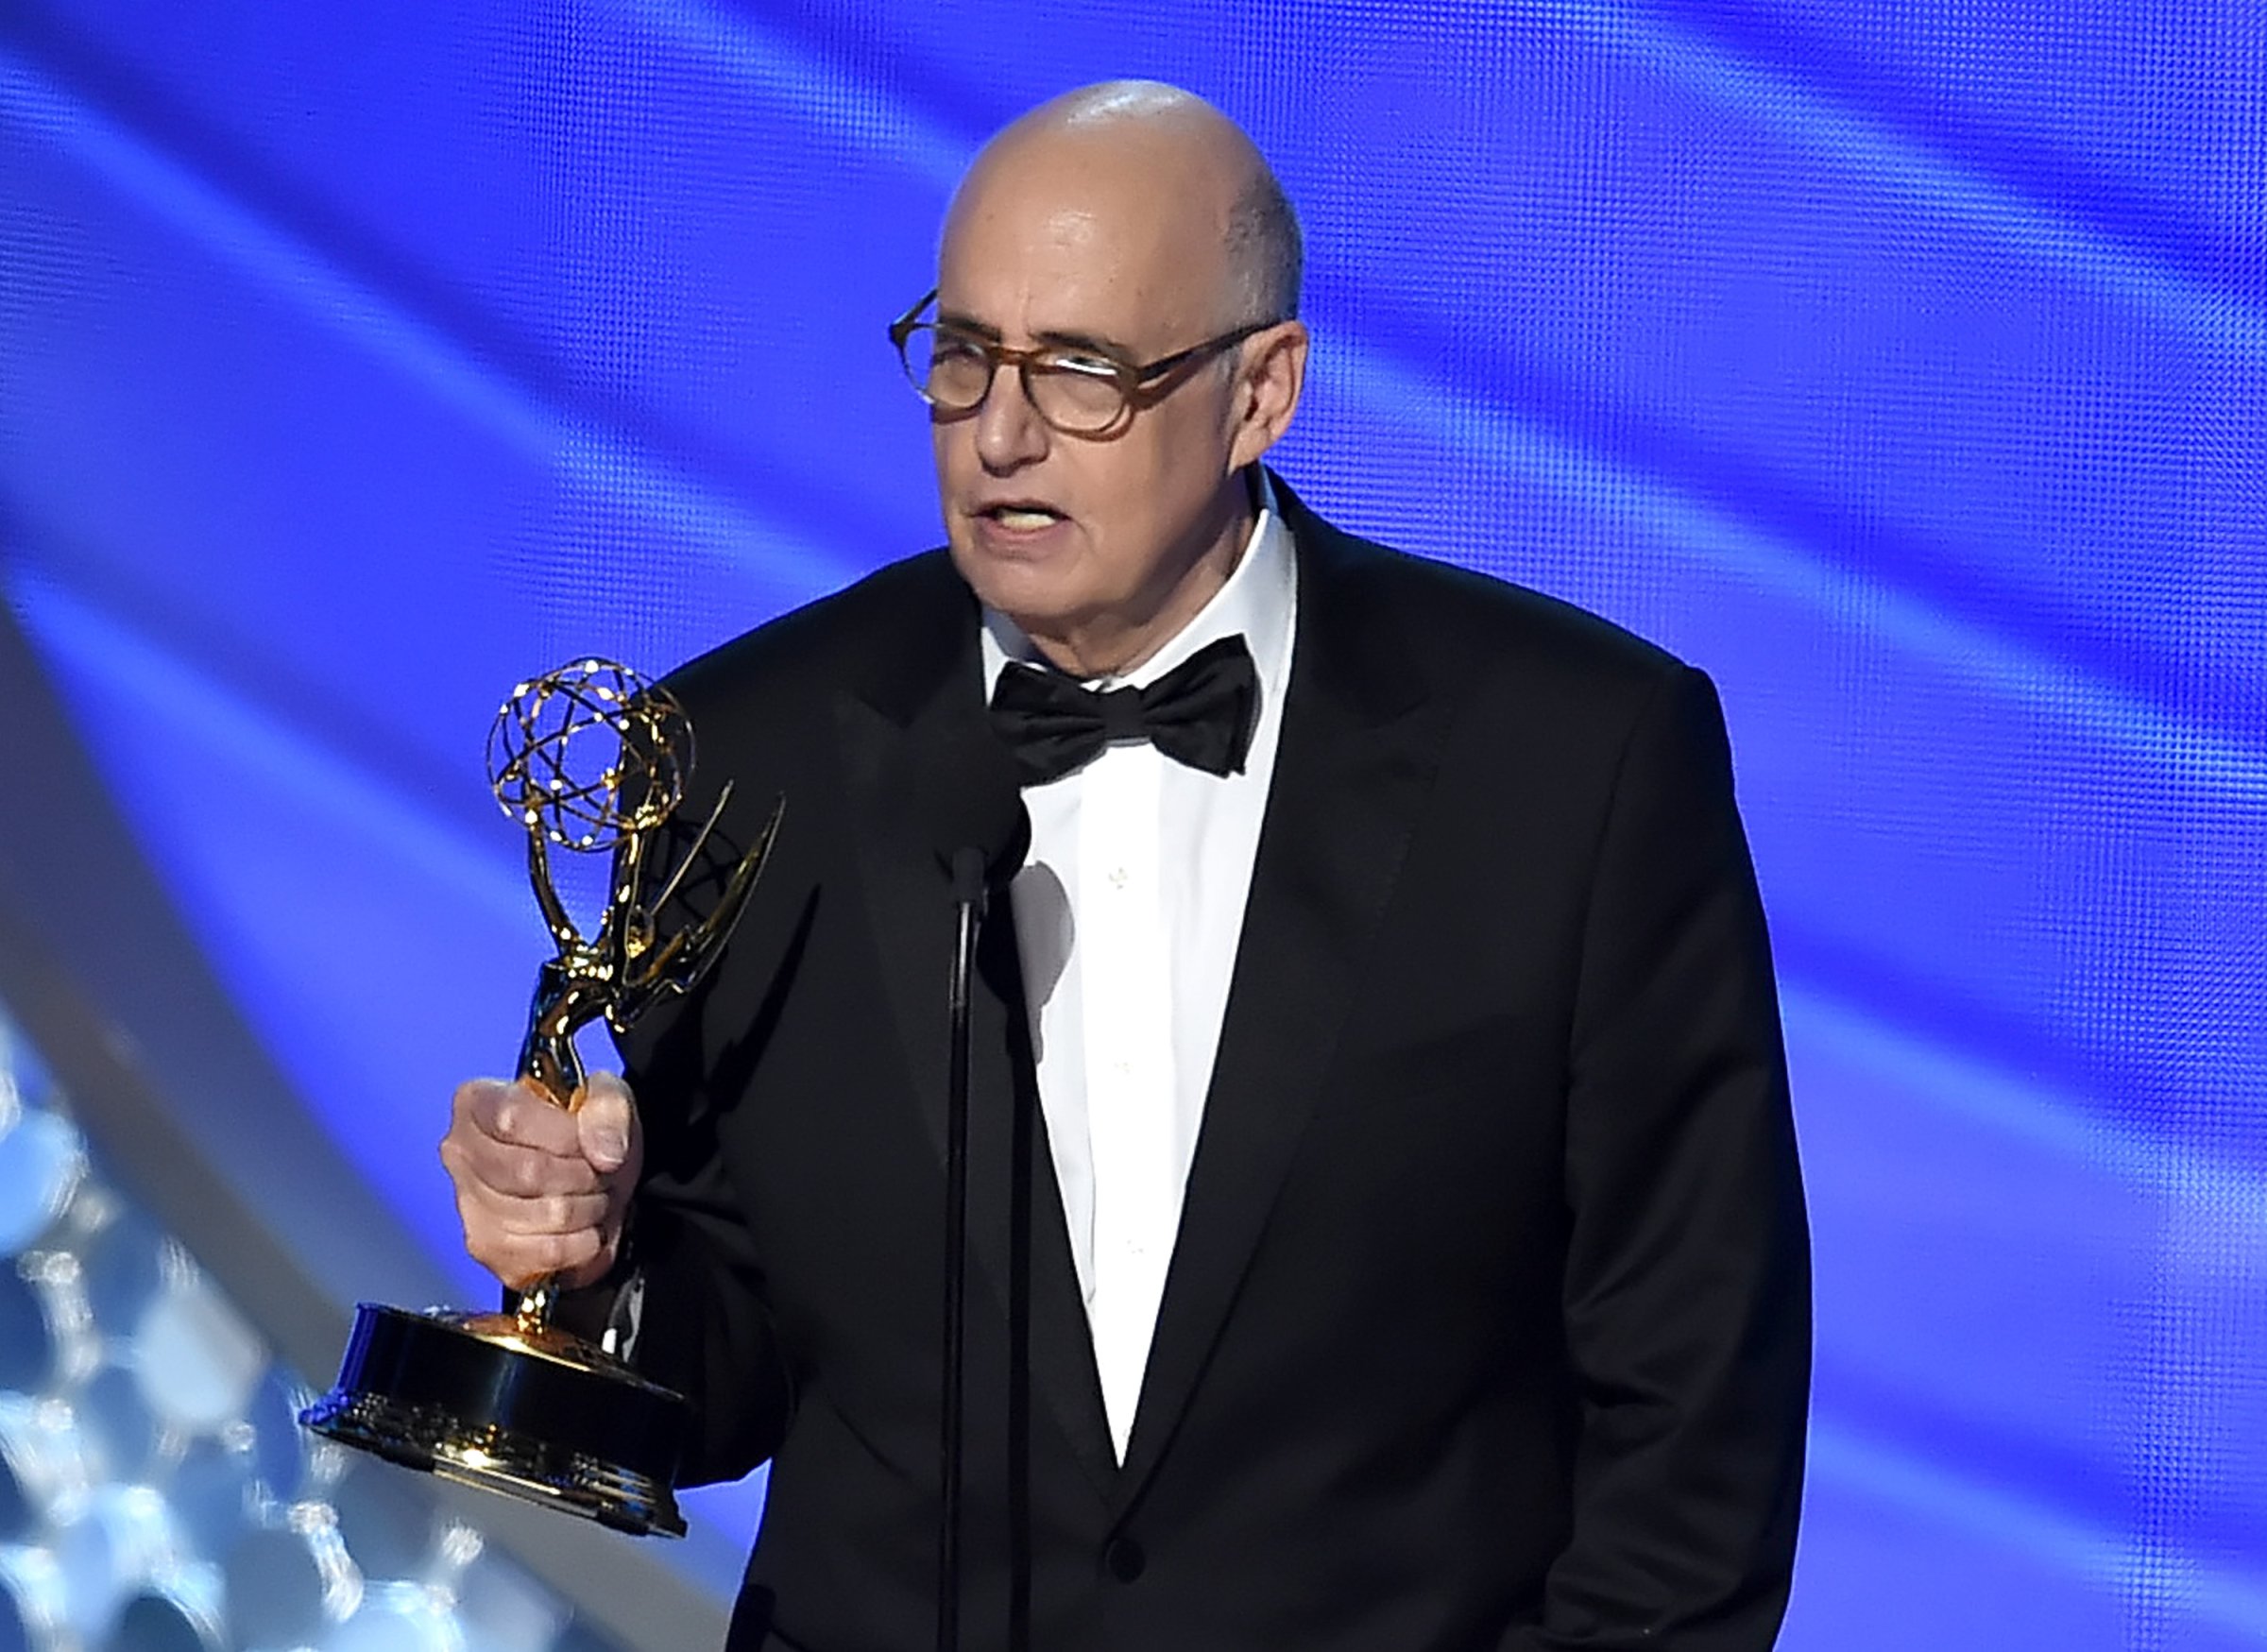 Jeffrey Tambor accepts Outstanding Lead Actor in a Comedy Series for Transparent onstage during the 68th Annual Primetime Emmy Awards on Sept. 18, 2016 in Los Angeles.